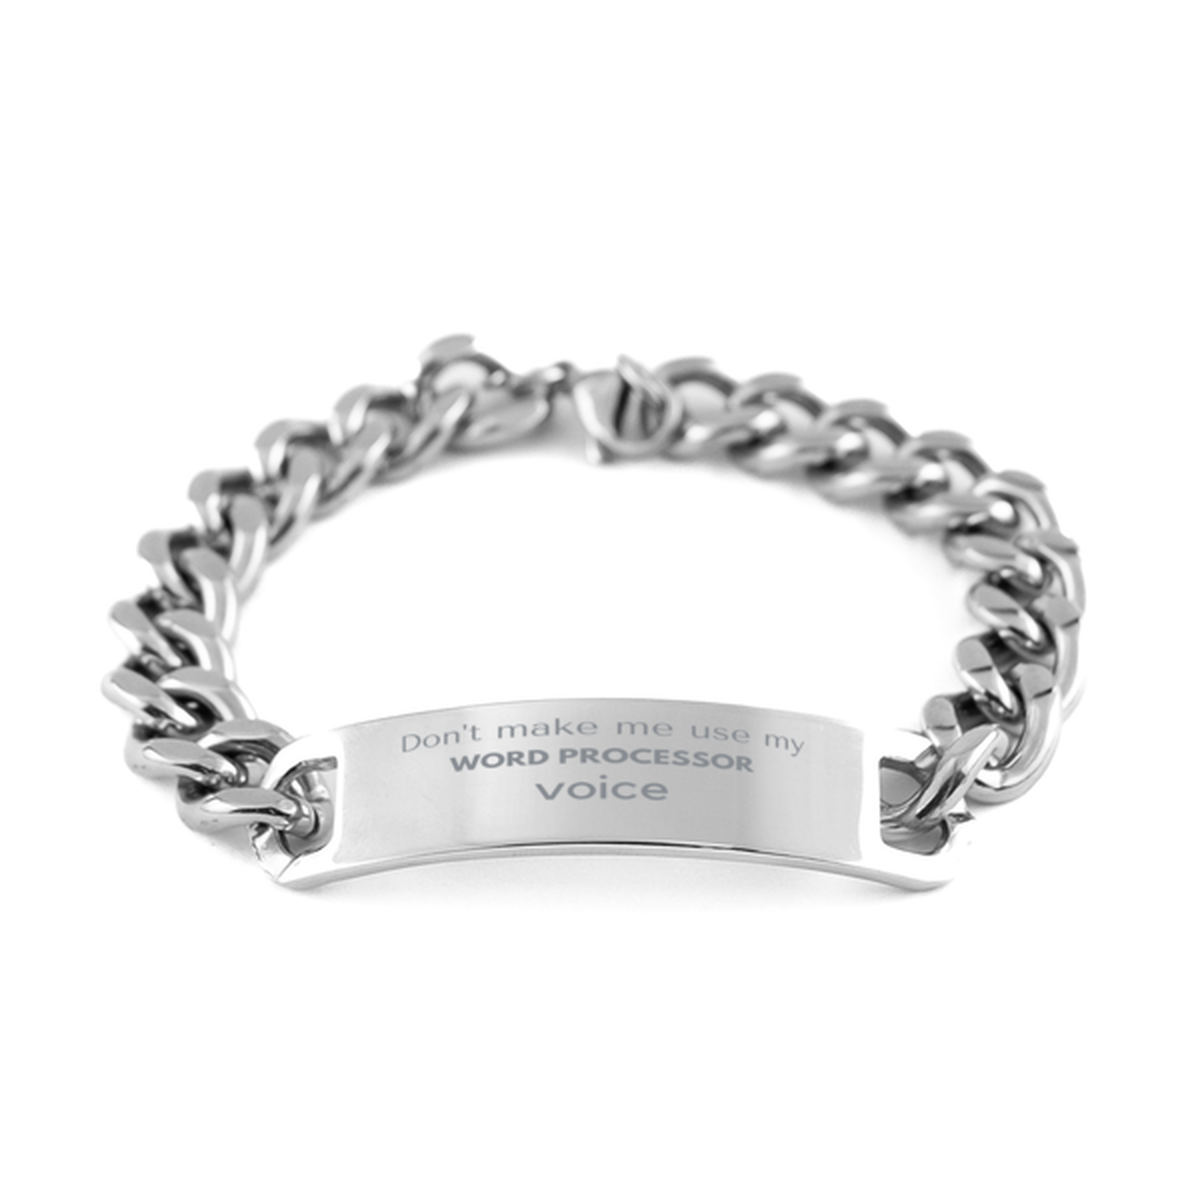 Don't make me use my Word Processor voice, Sarcasm Word Processor Gifts, Christmas Word Processor Cuban Chain Stainless Steel Bracelet Birthday Unique Gifts For Word Processor Coworkers, Men, Women, Colleague, Friends